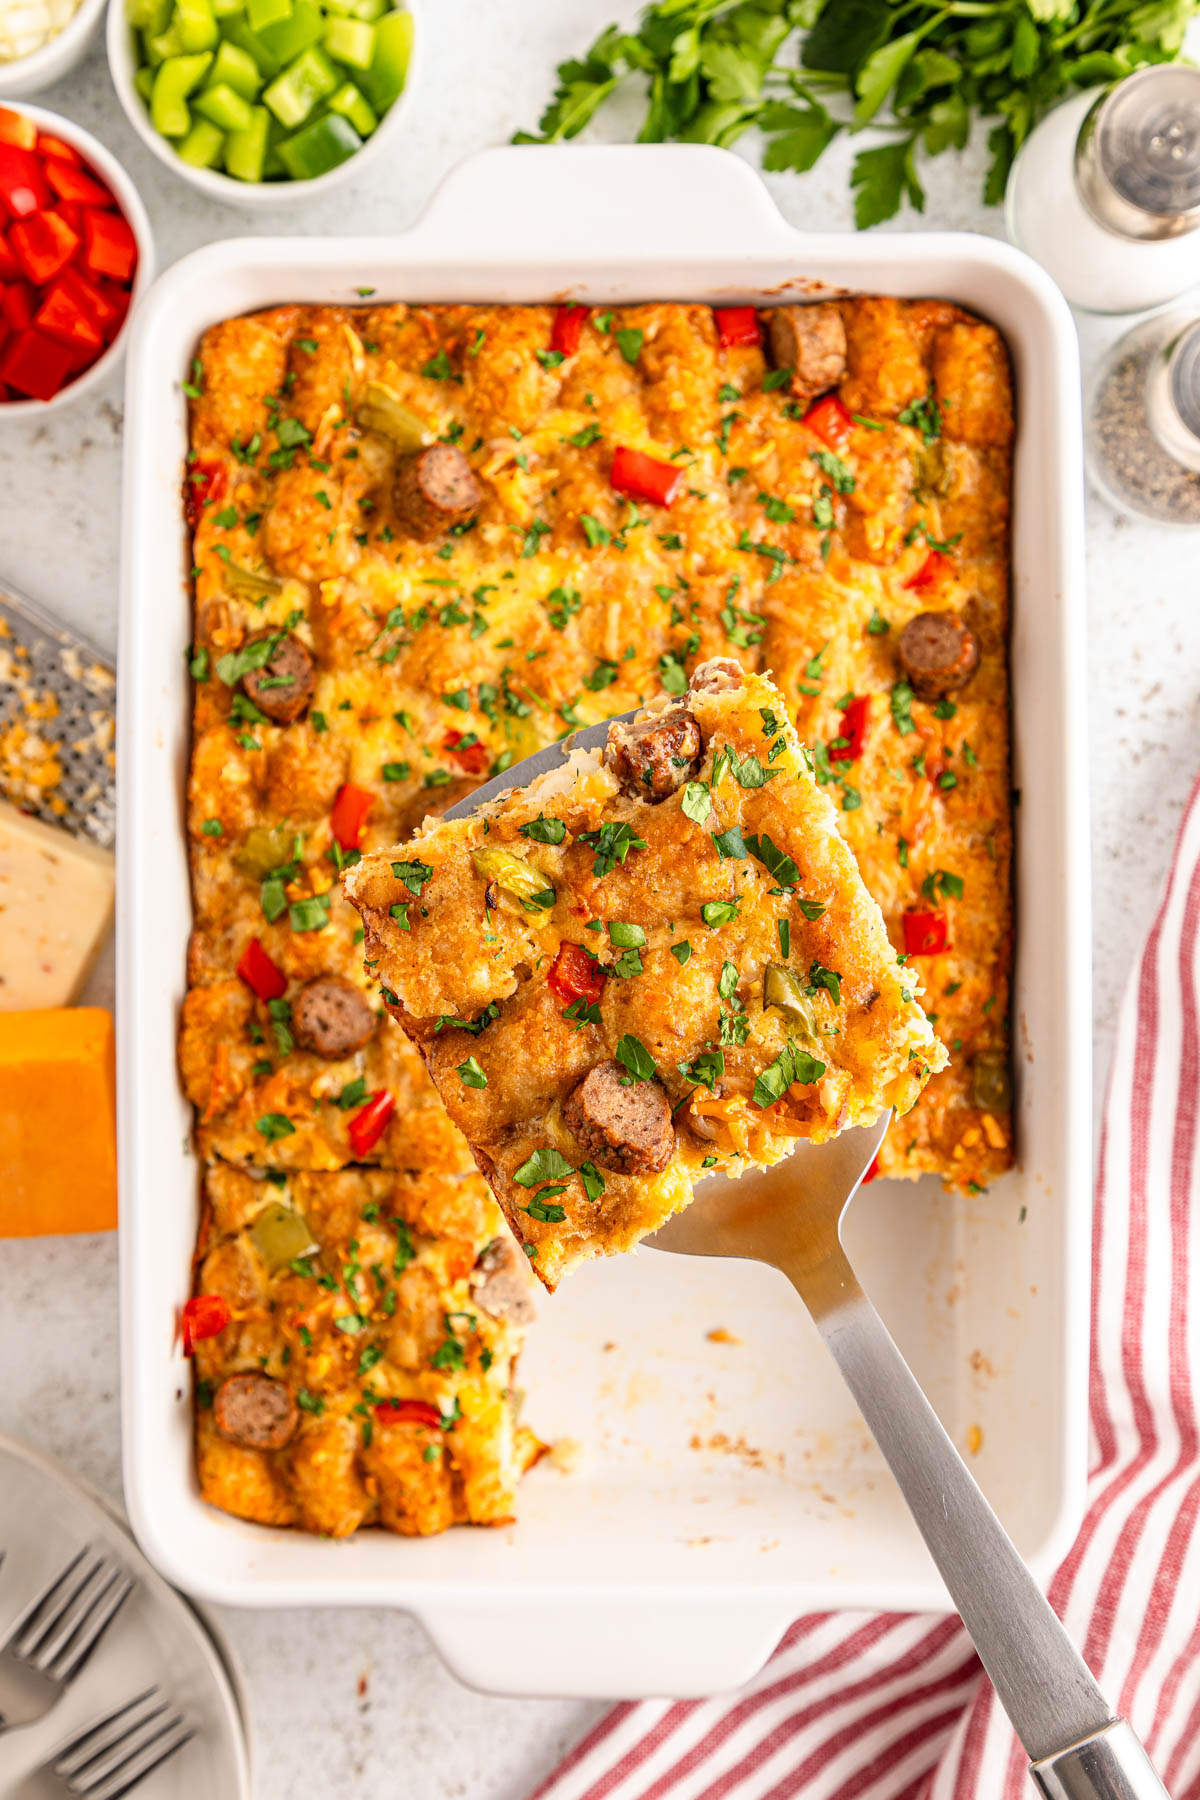 A freshly baked casserole with sausage, cheese, and diced vegetables, served with a spatula.